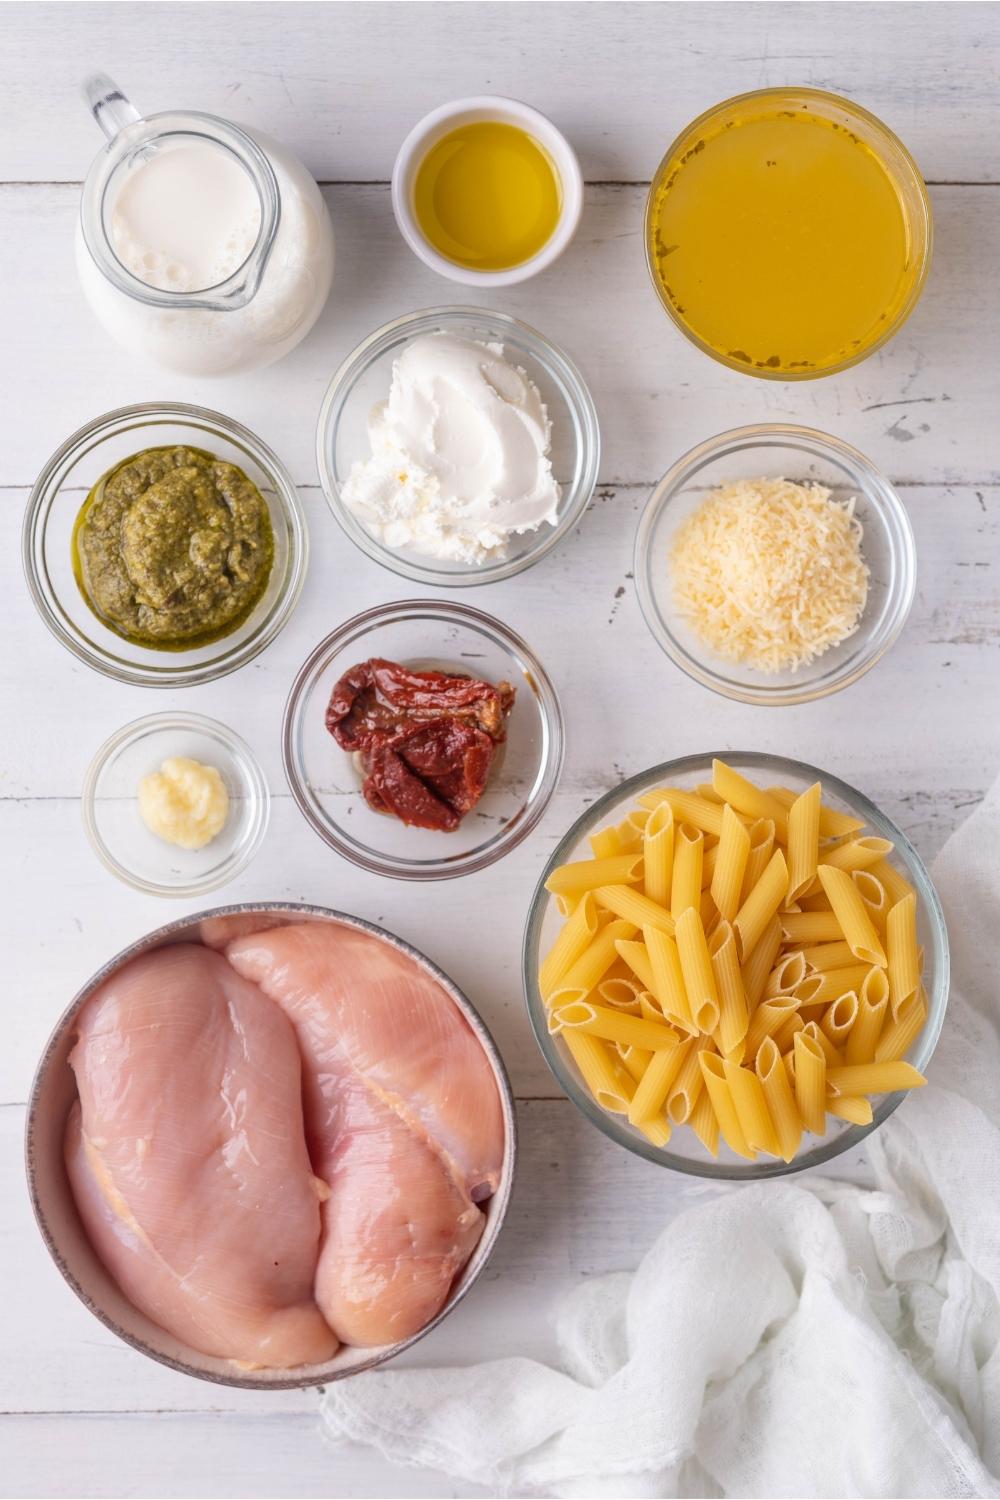 An assortment of ingredients to make pesto chicken pasta including raw chicken, penne pasta, chicken broth, cream cheese, pesto, and seasonings.